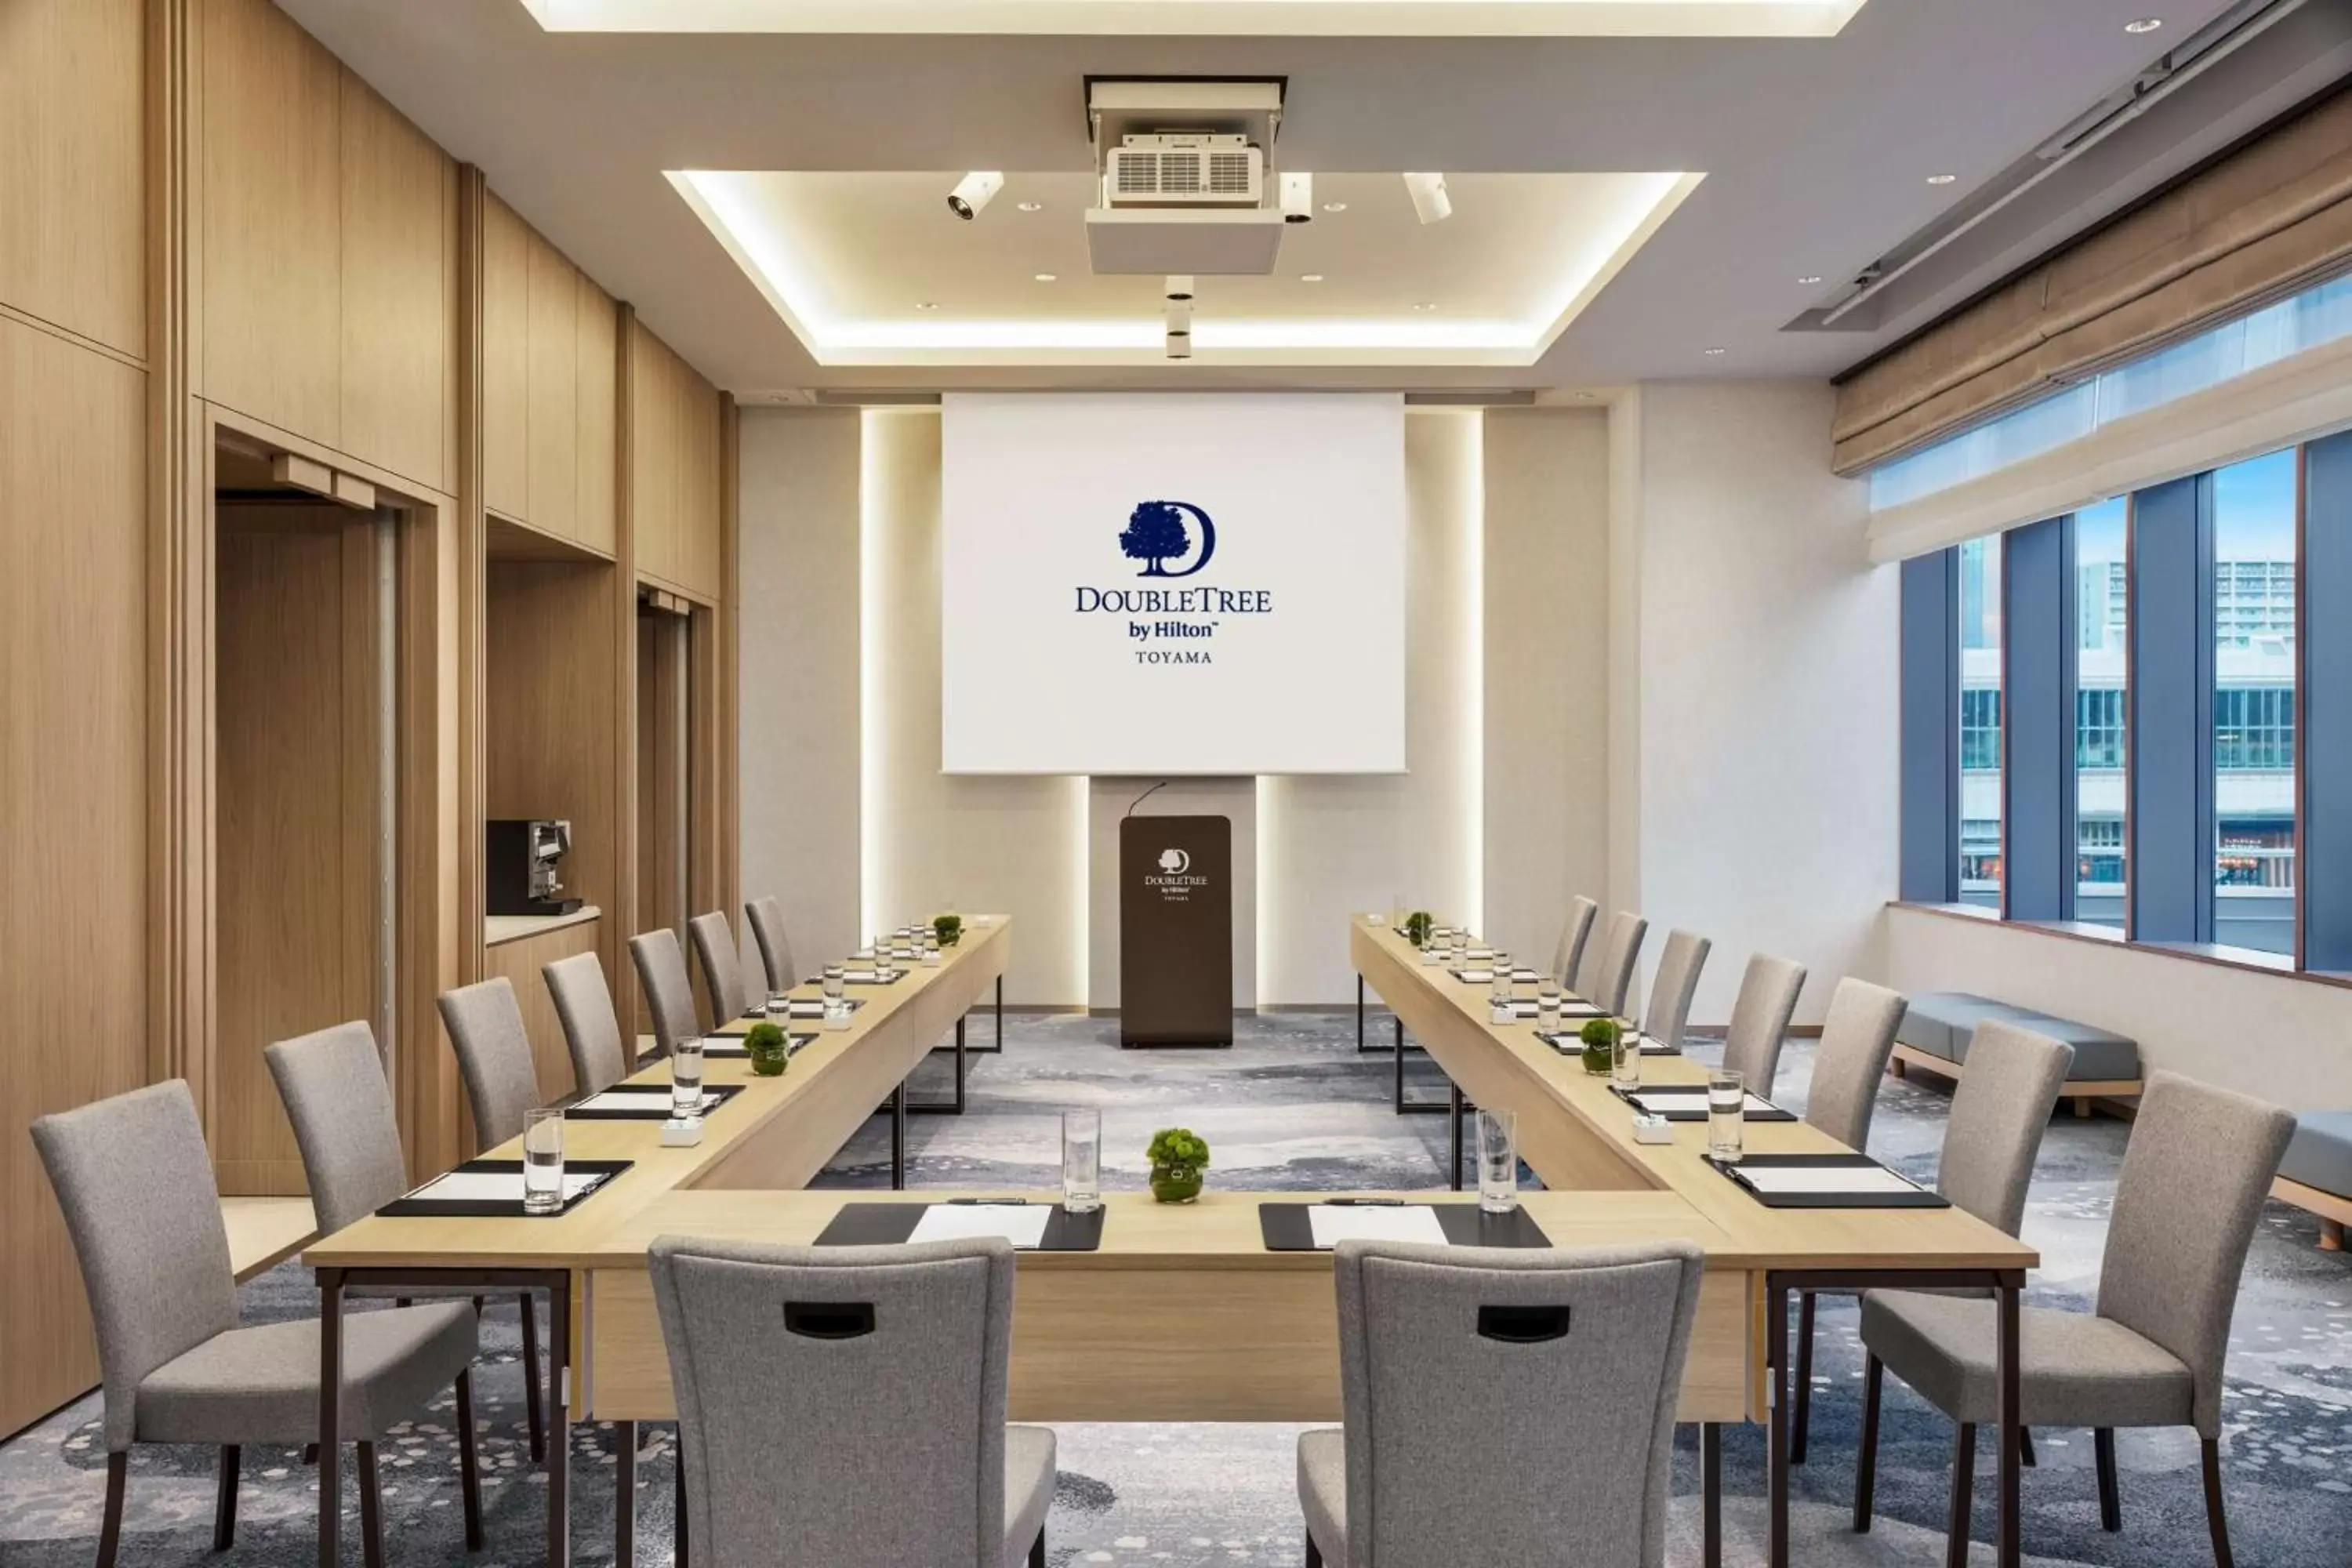 Meeting/conference room in DoubleTree by Hilton Toyama